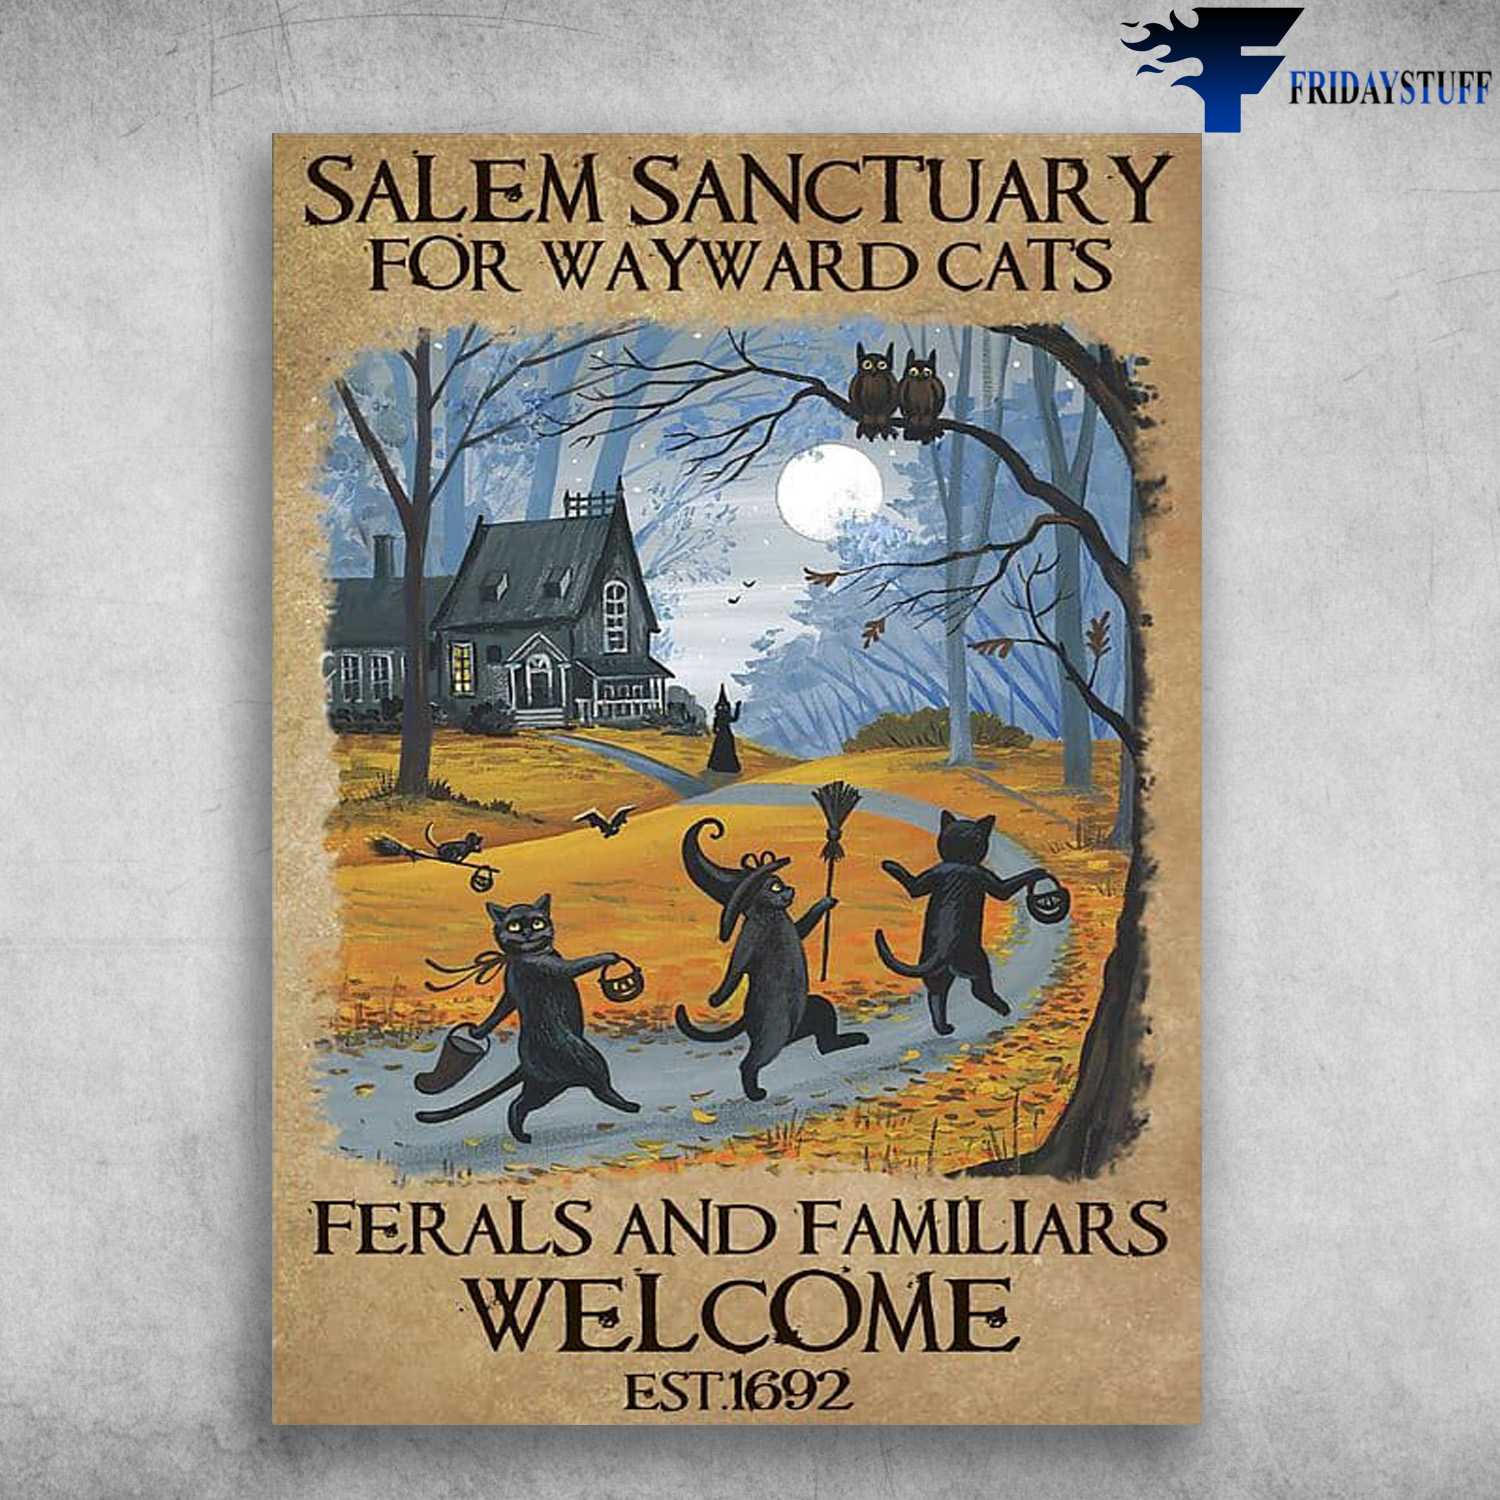 Black Cat Halloween - Salem Sanctuary For Wayward Cats, Ferals And Familiars, Welcome, Witch Cat